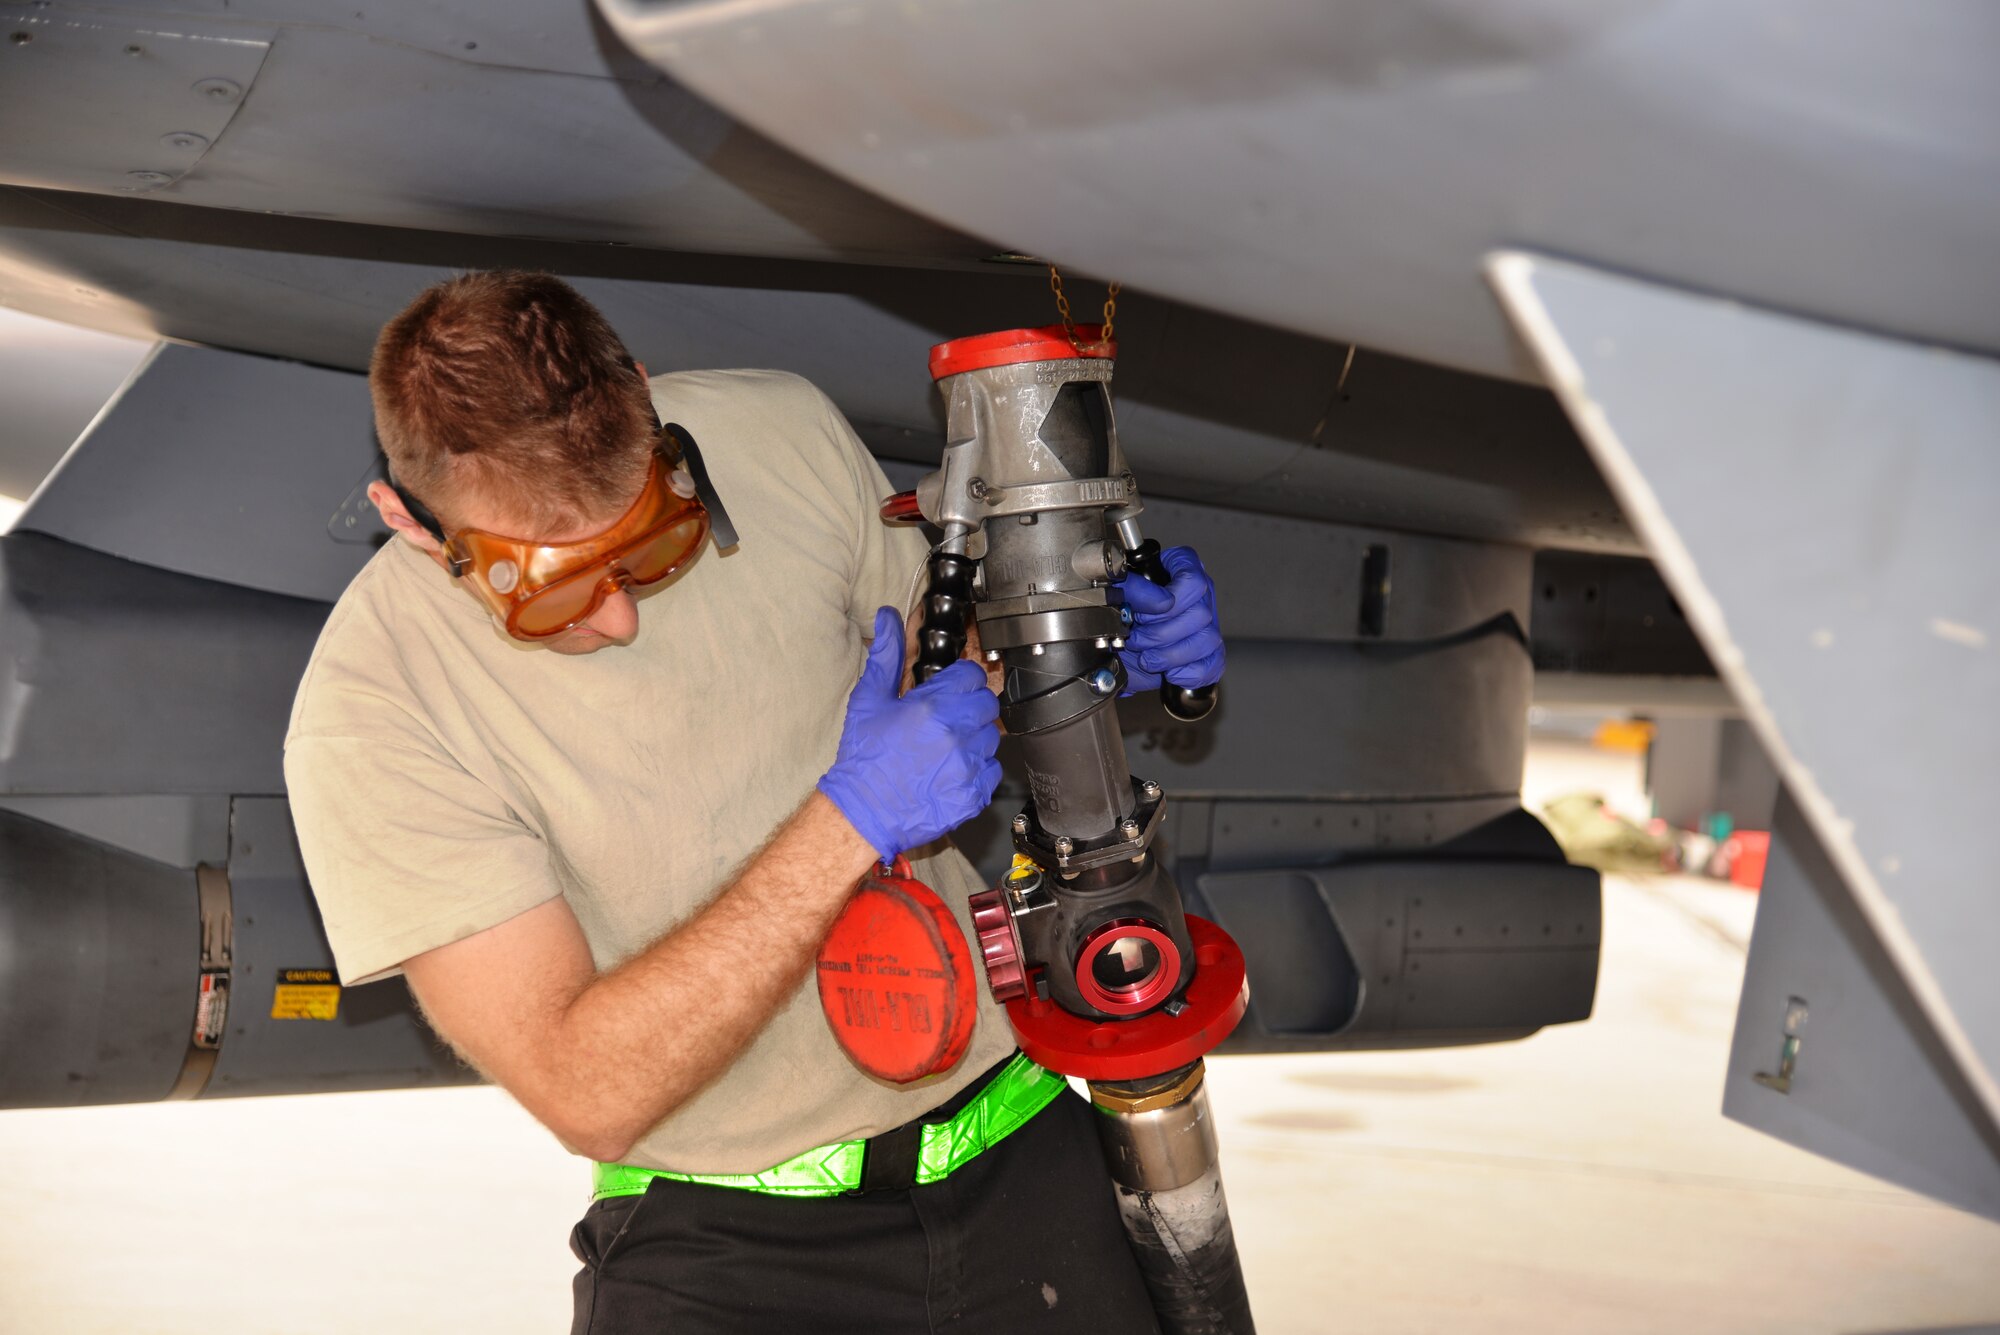 EIELSON AIR FORCE BASE, Alaska -- U.S. Air Force crew chief from the 4th Fighter Wing, Seymour Johnson Air Force Base, N.C., detaches a fuel hose from an F-15 Eagle after re-fueling June 23, 2015, at Eielson Air Force Base, Alaska during Northern Edge 15. Northern Edge 2015 is Alaska’s premier joint training exercise designed to practice operations, techniques and procedures as well as enhance interoperability among the services. Thousands of participants from all the services, Airmen, Soldiers, Sailors, Marines and Coast Guardsmen from active duty, Reserve and National Guard units are involved. (U.S. Air Force photo by Staff Sgt. Kirsten Wicker/Released)